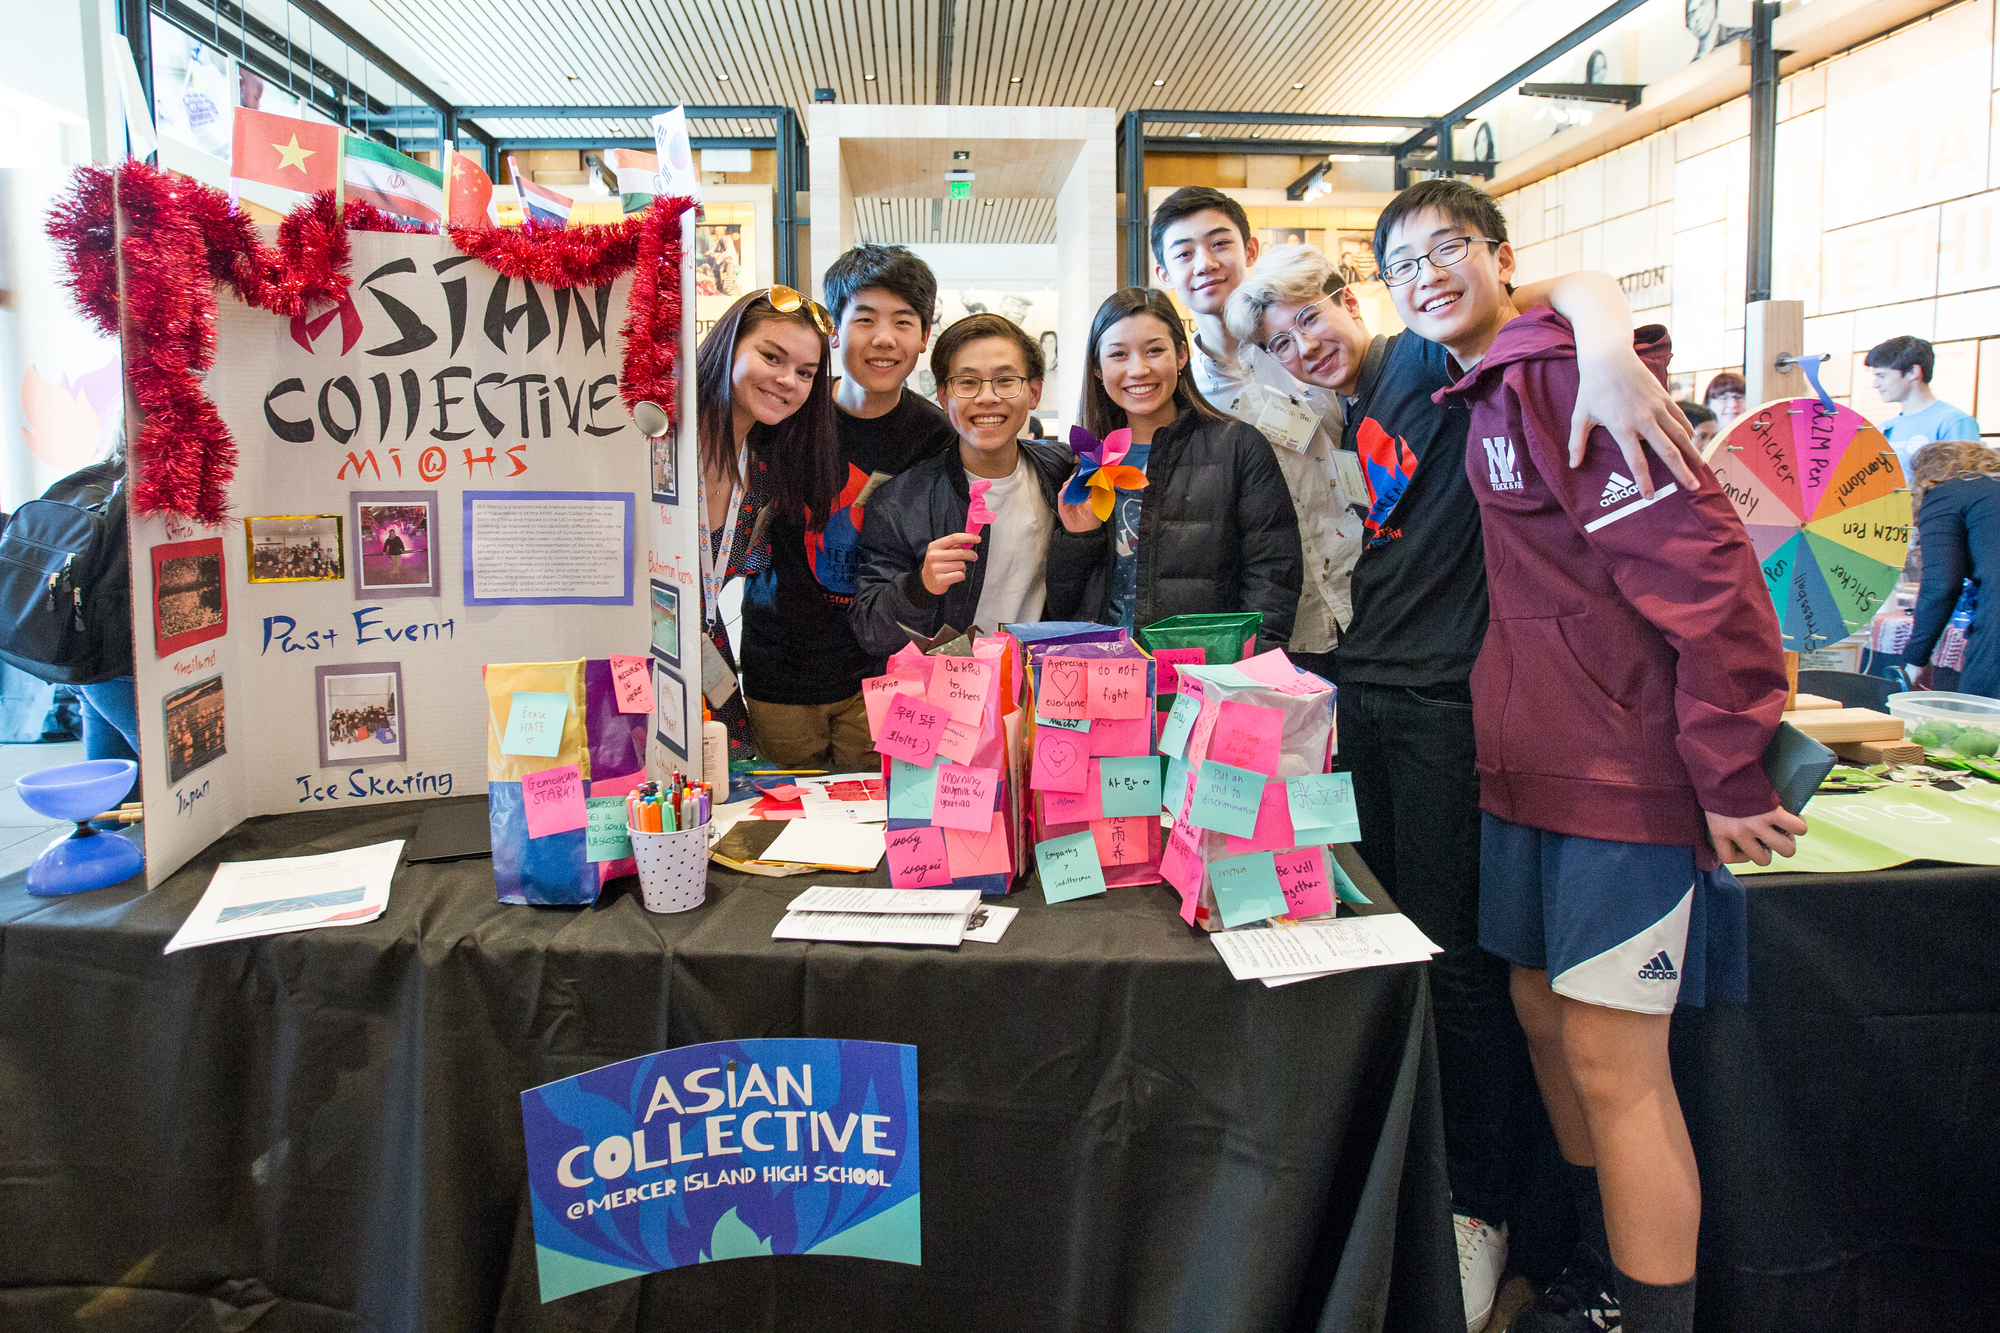 Mercer Island High School Asian Collective club members smiling together at Teen Action Fair.